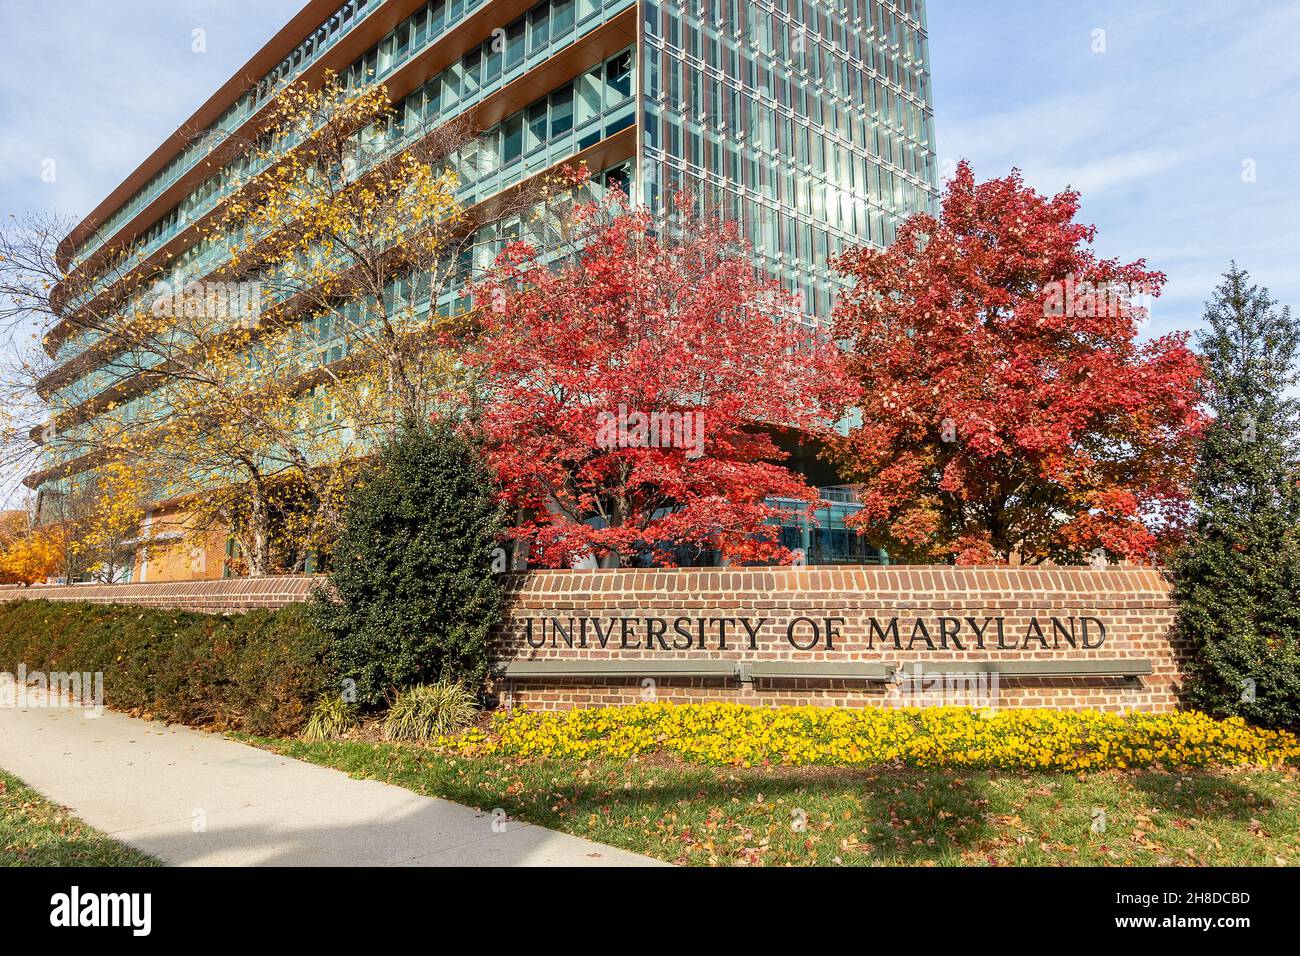 COLLEGE PARK, MD, USA - NOVEMBER 20: Entrance Sign on November 20, 2021 at the University of Maryland in College Park, Maryland. Stock Photo